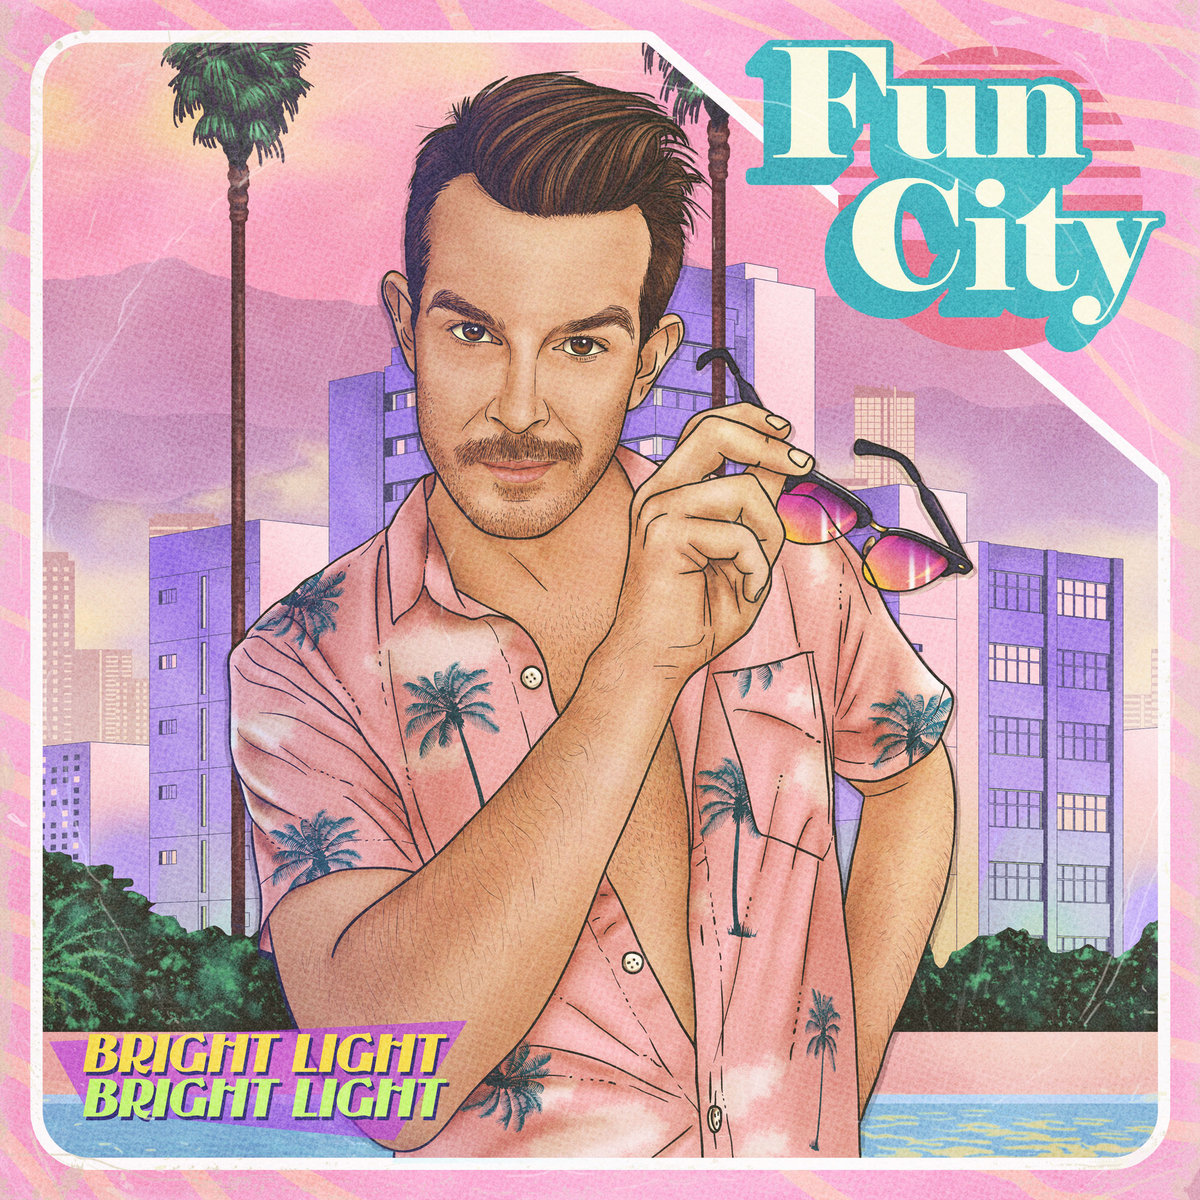 8. Fun City - Bright Light Bright Light.Choreography is still his best album, IMO, but Fun City is great too. It also happened to get me through 2 boring weeks in September. Best tracks:Good At GoodbyesIt's Alright, It's OKSensationYou Make It So Easy, Don't You